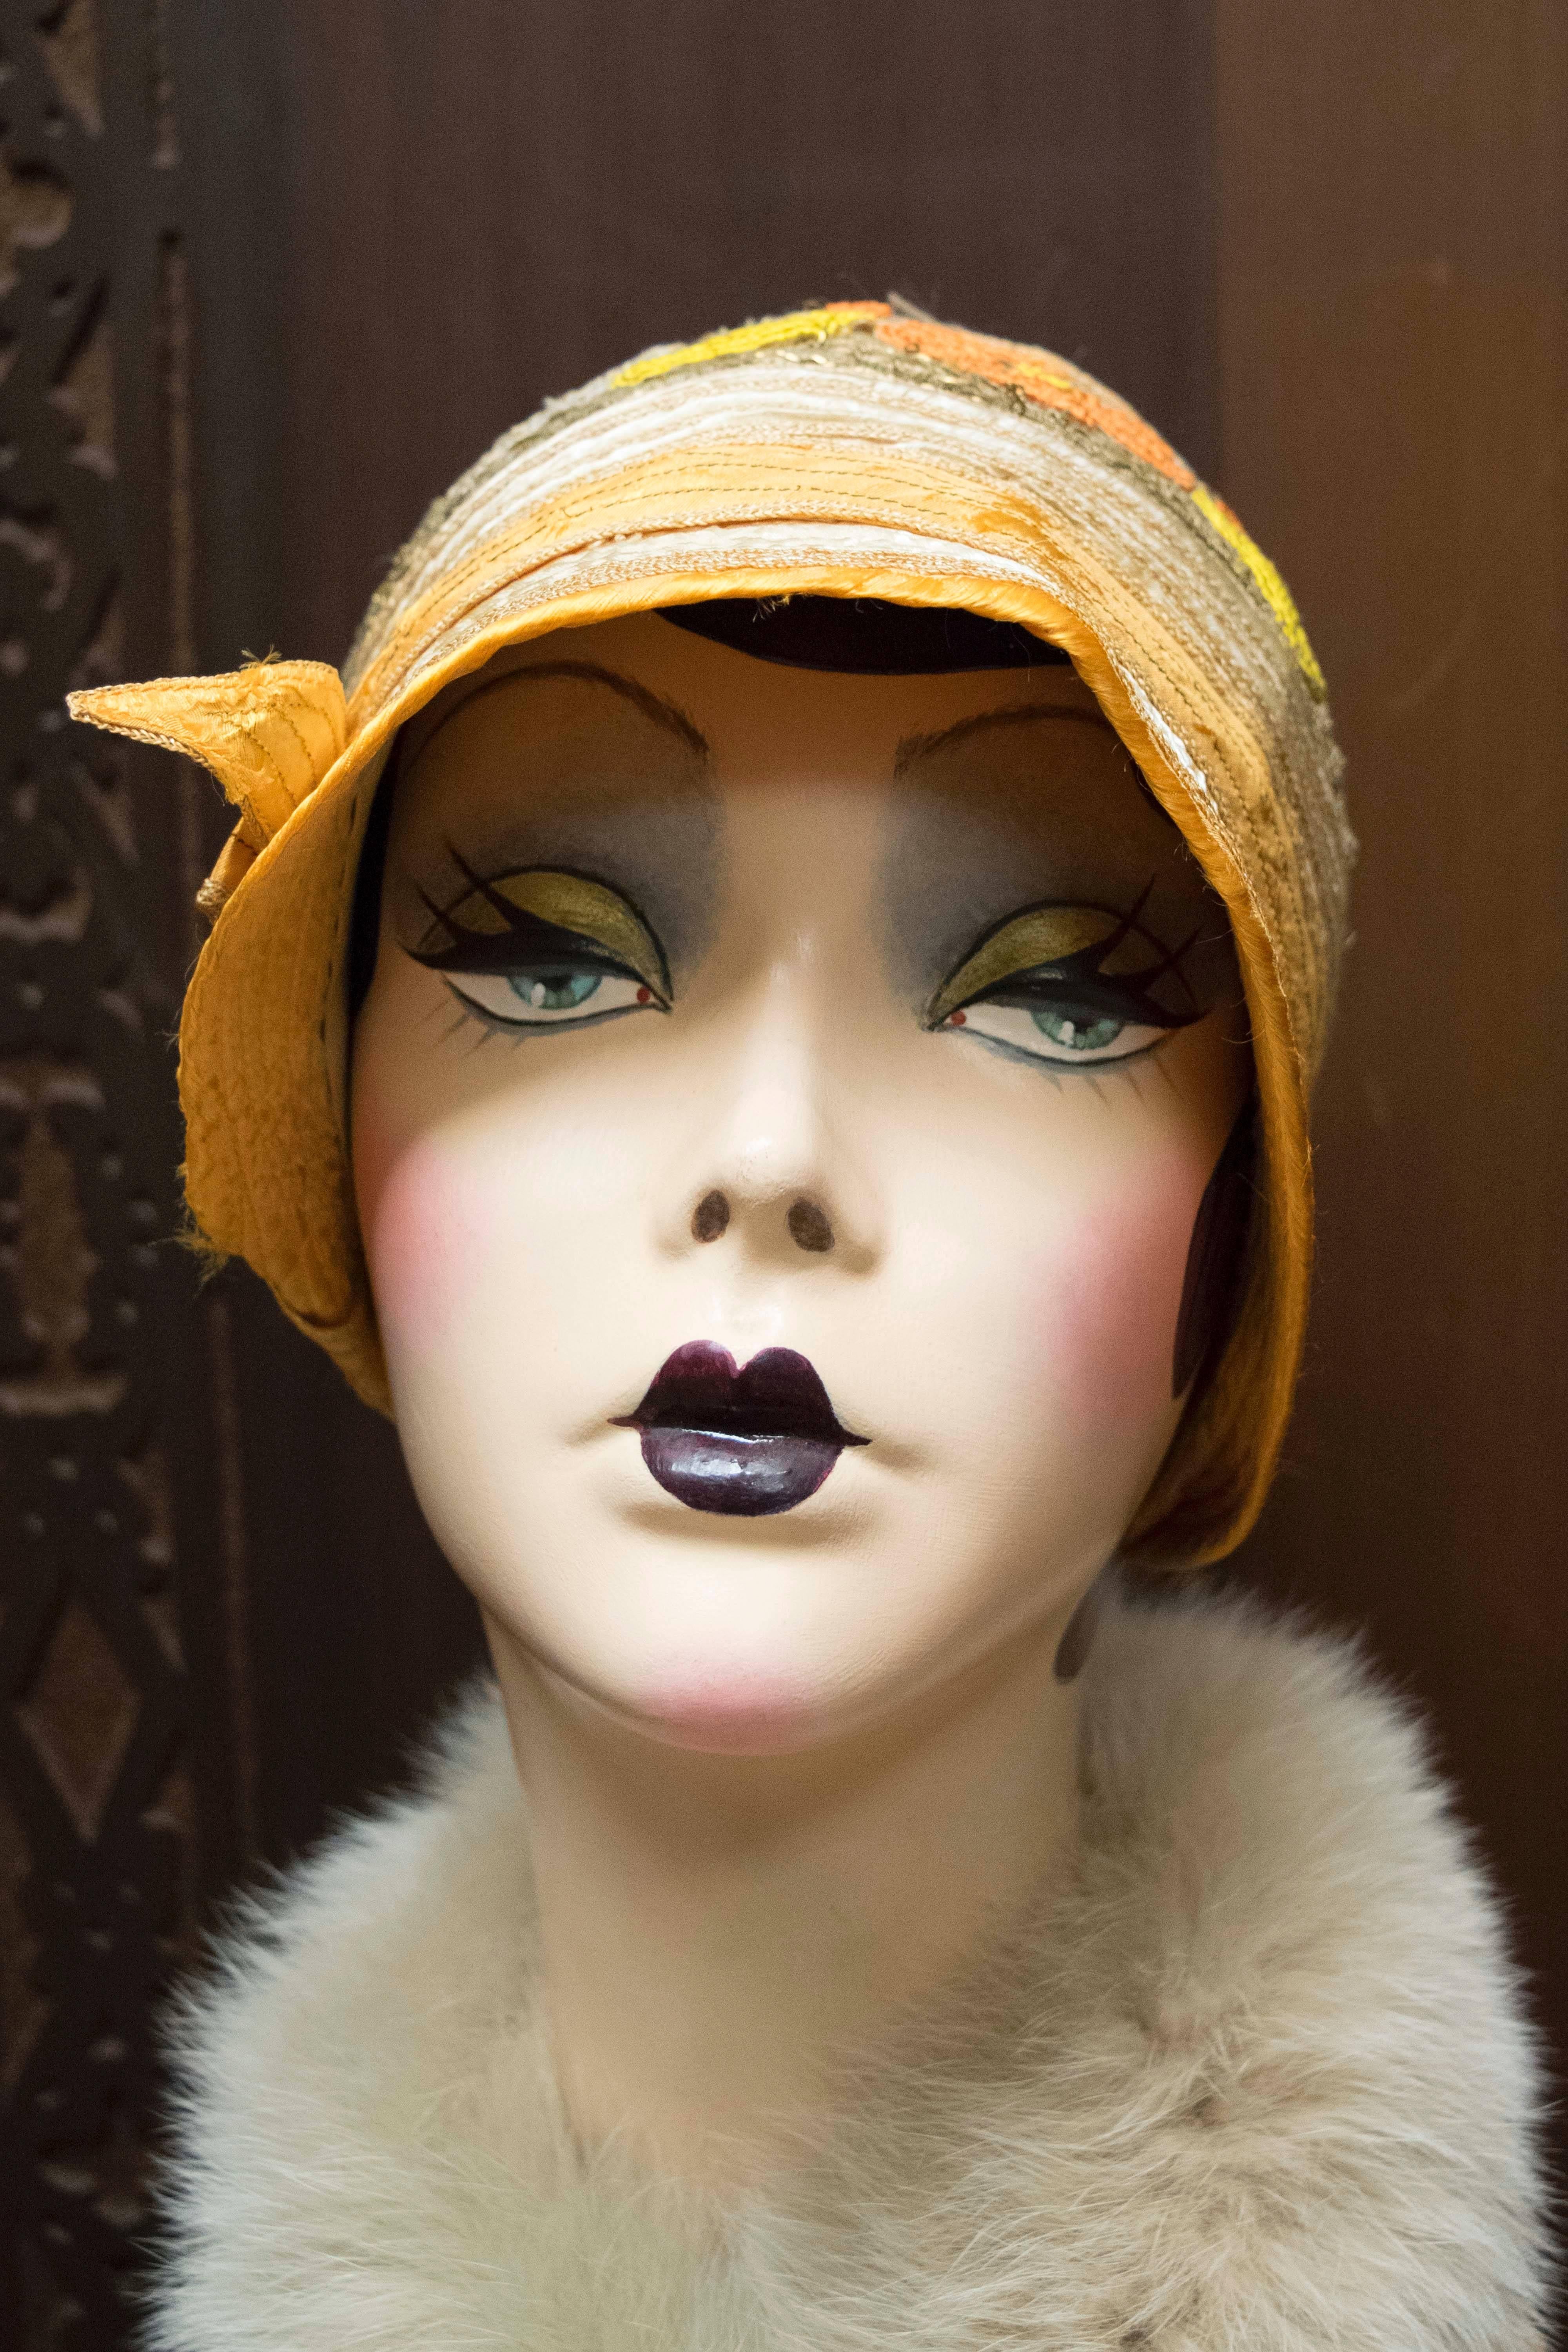 1920s Cloche Hat

Beautiful 1920s Cloche with wonderful soutache detailing. The hat is silk with a woven straw trim, and metallic embellishments. This piece is wearable piece of fashion history perfect for a collector or fashion lover. 

22